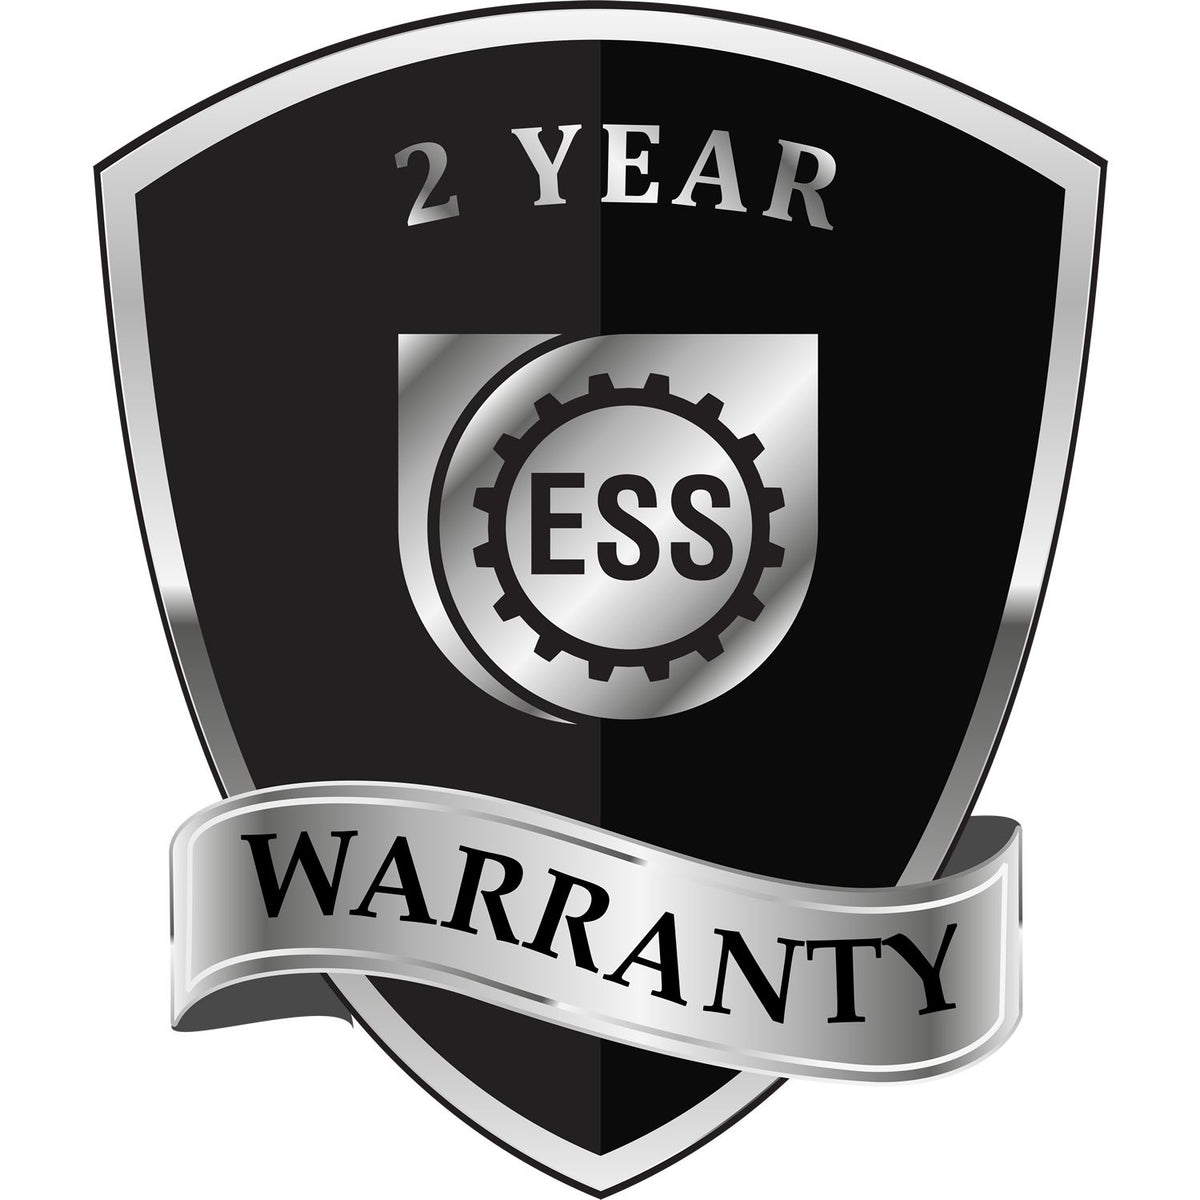 A black and silver badge or emblem showing warranty information for the Hybrid Rhode Island Architect Seal